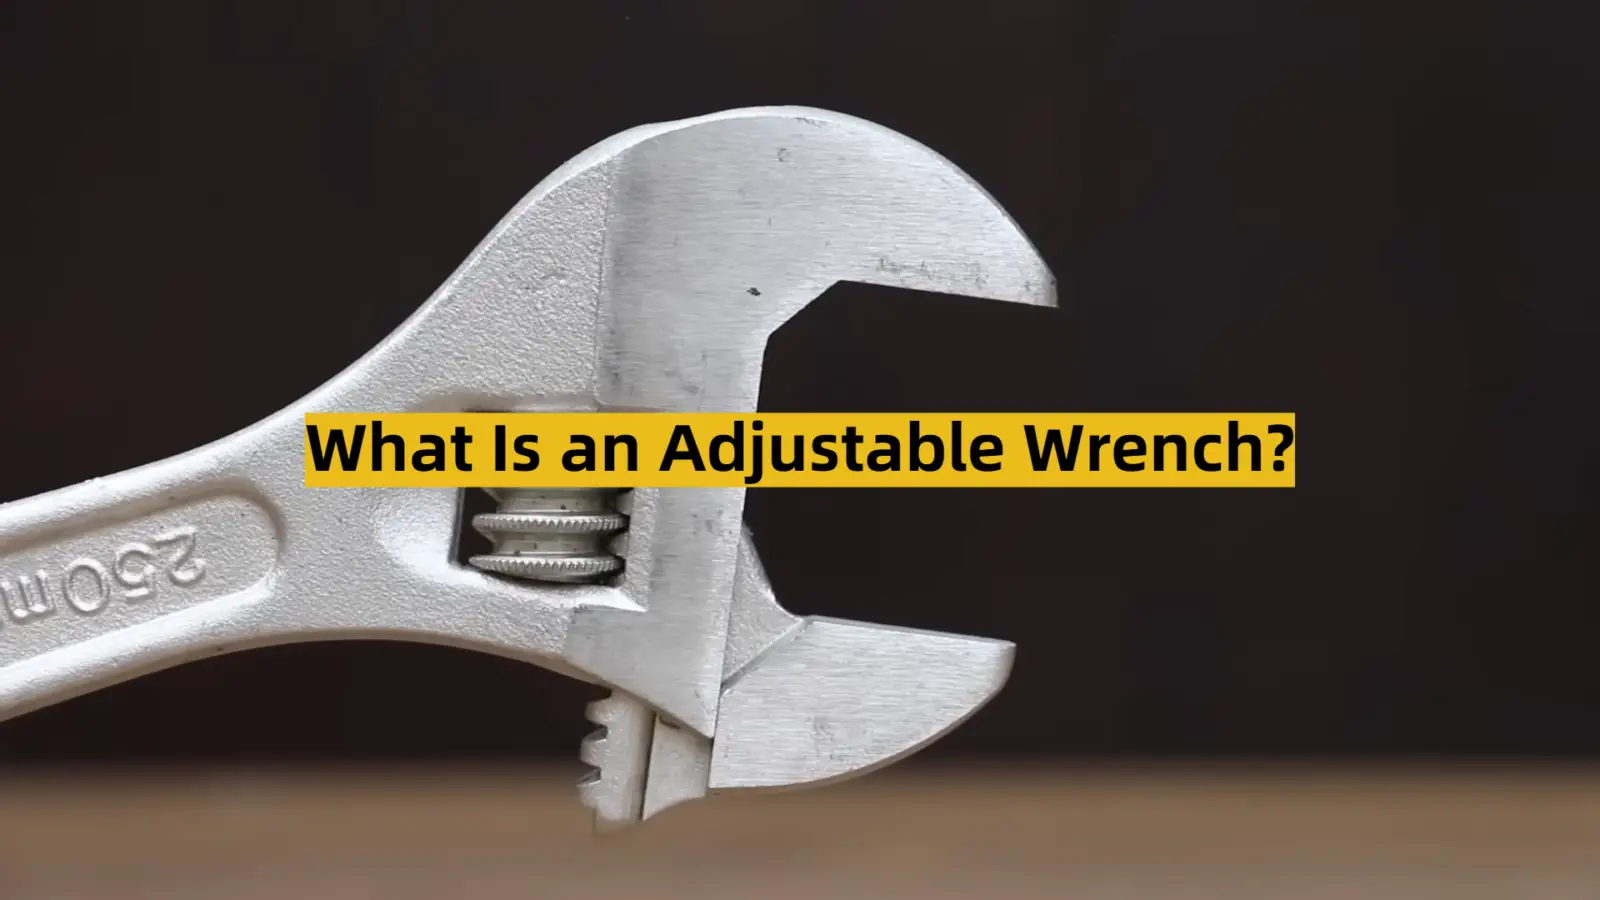 What Is an Adjustable Wrench?